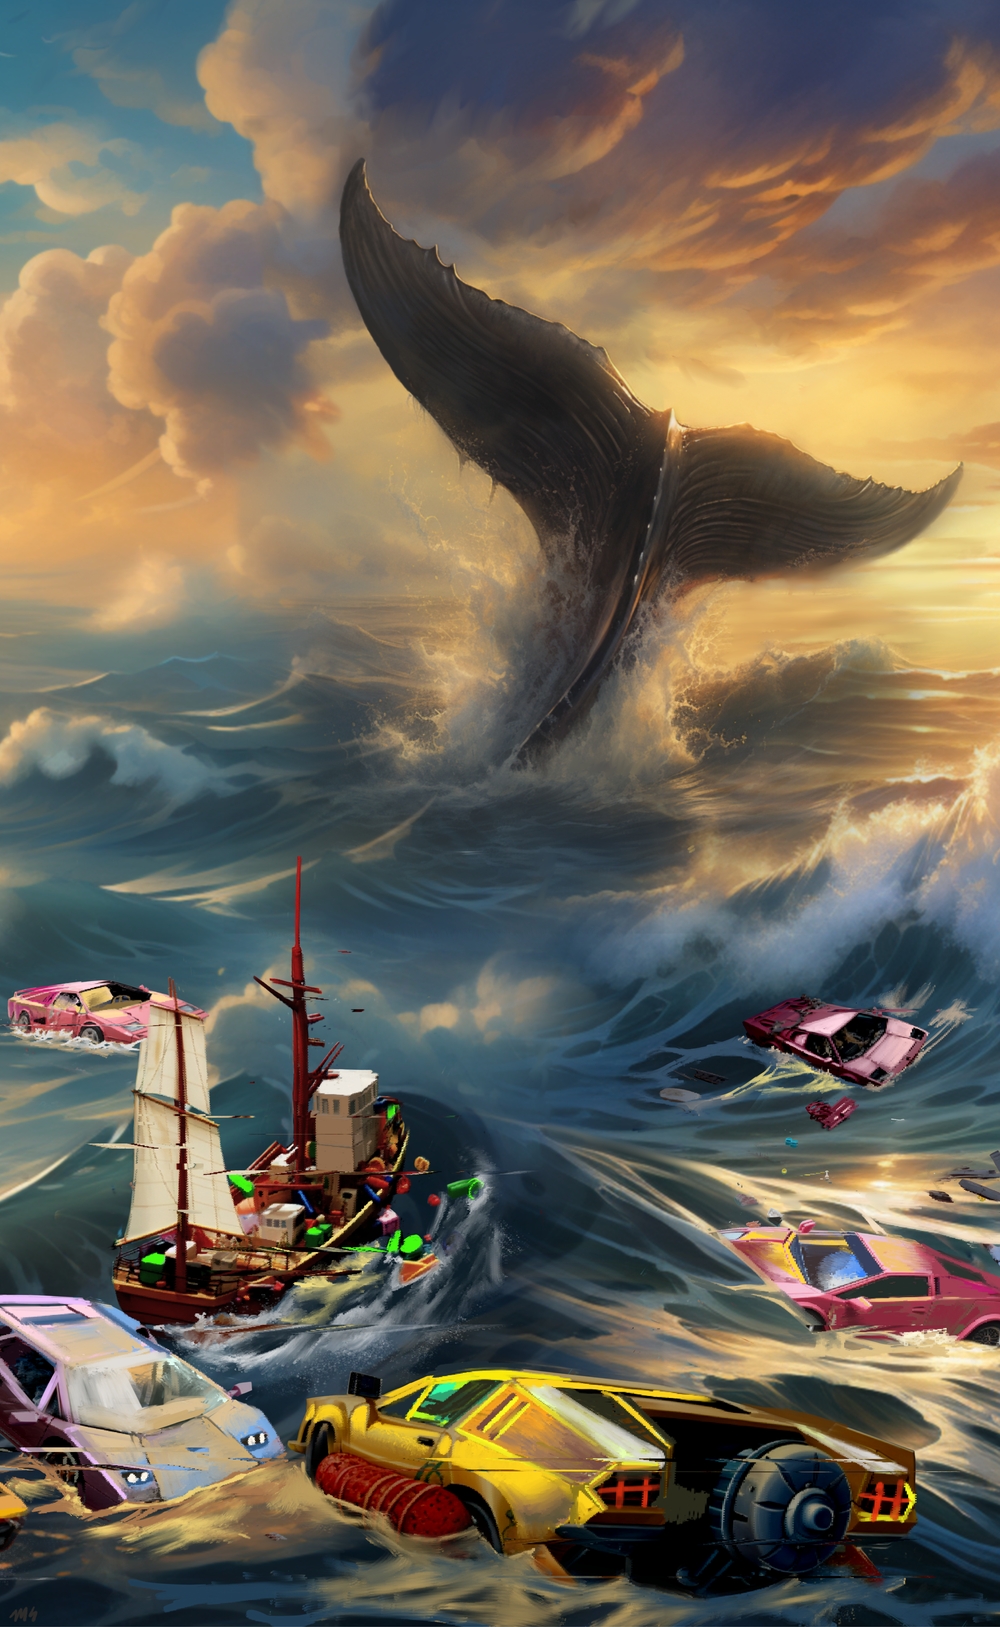 Tale of The Black Whale